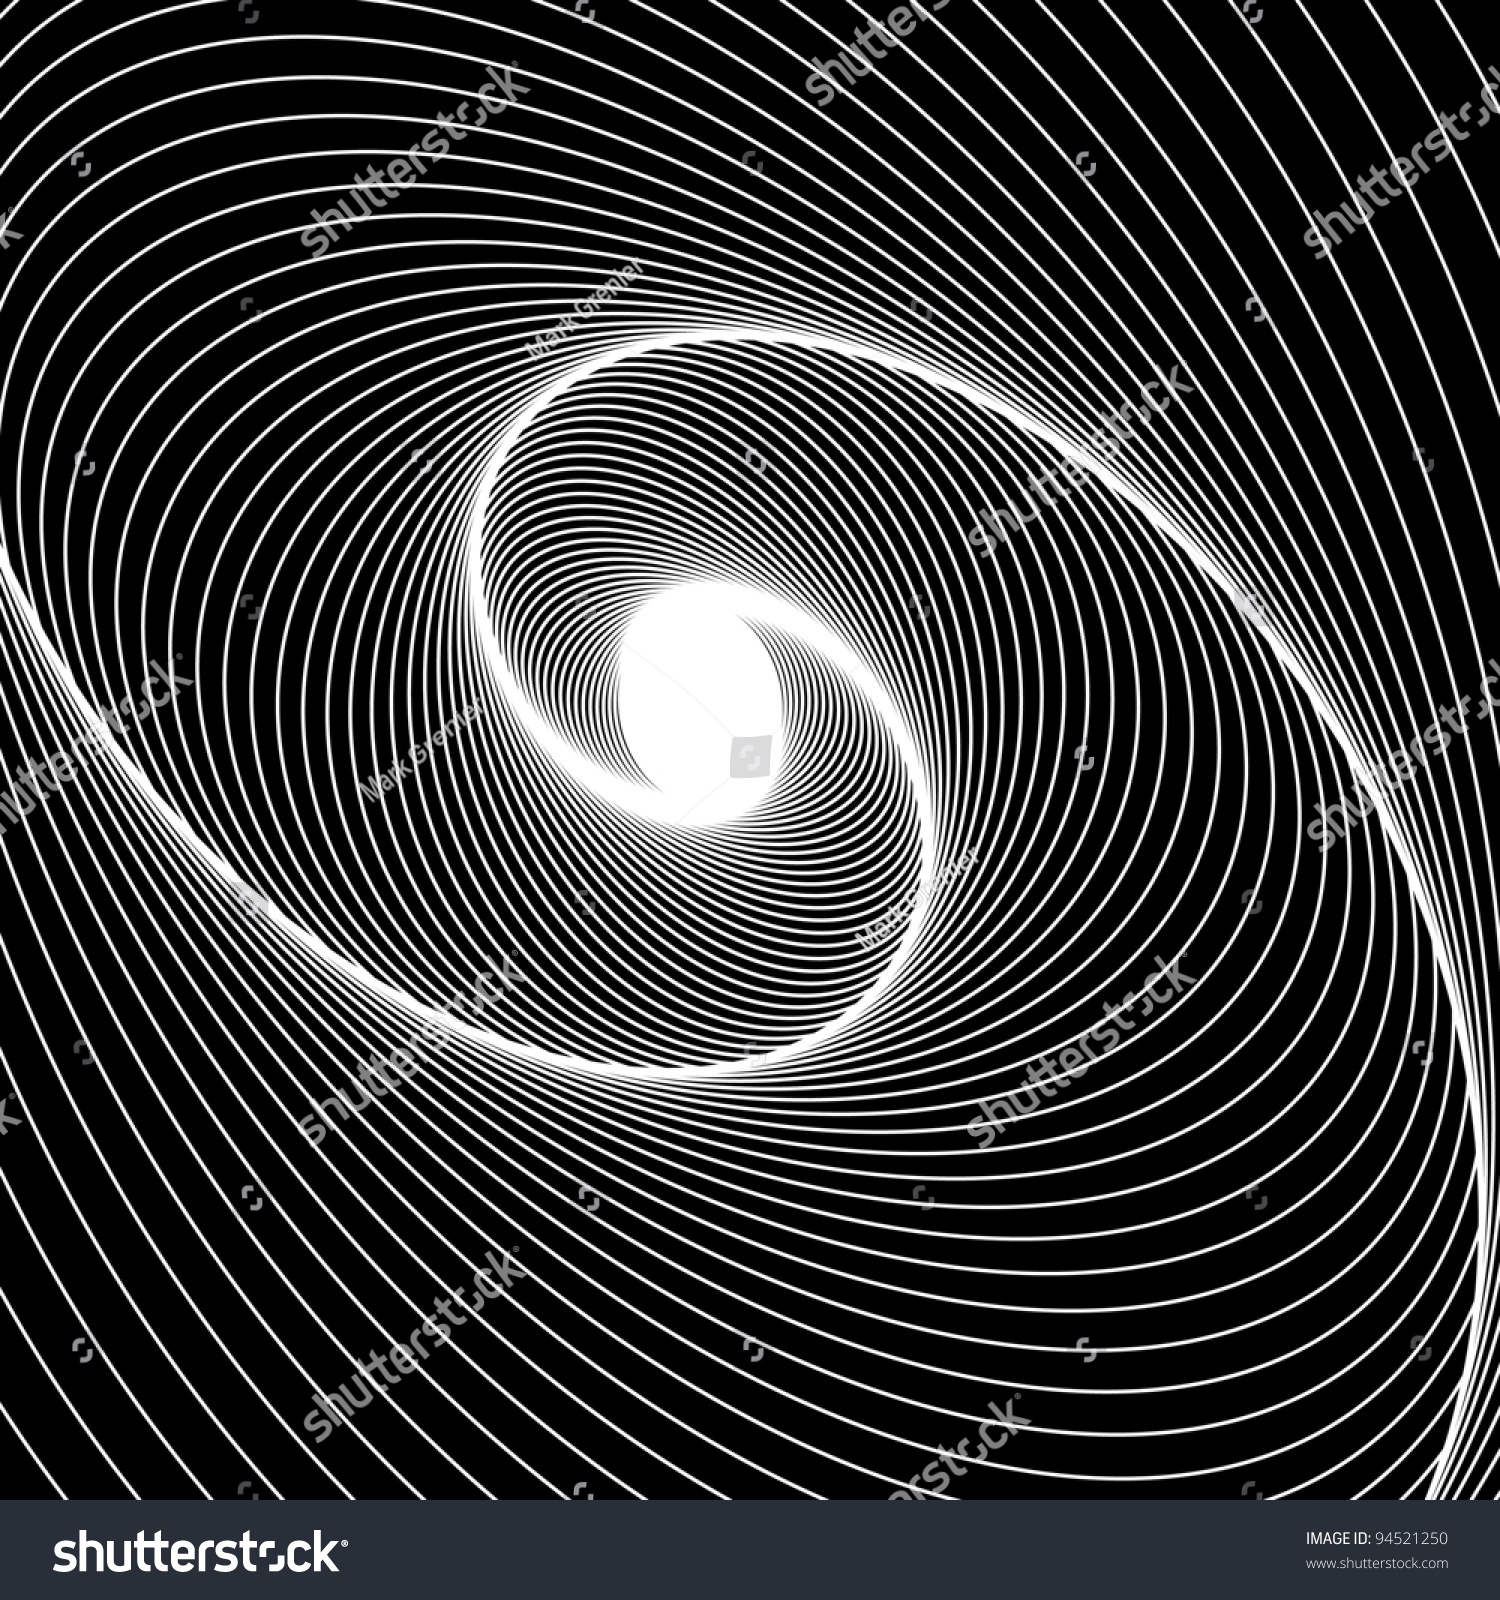 Spiral Wave Stock Vector (Royalty Free) 94521250